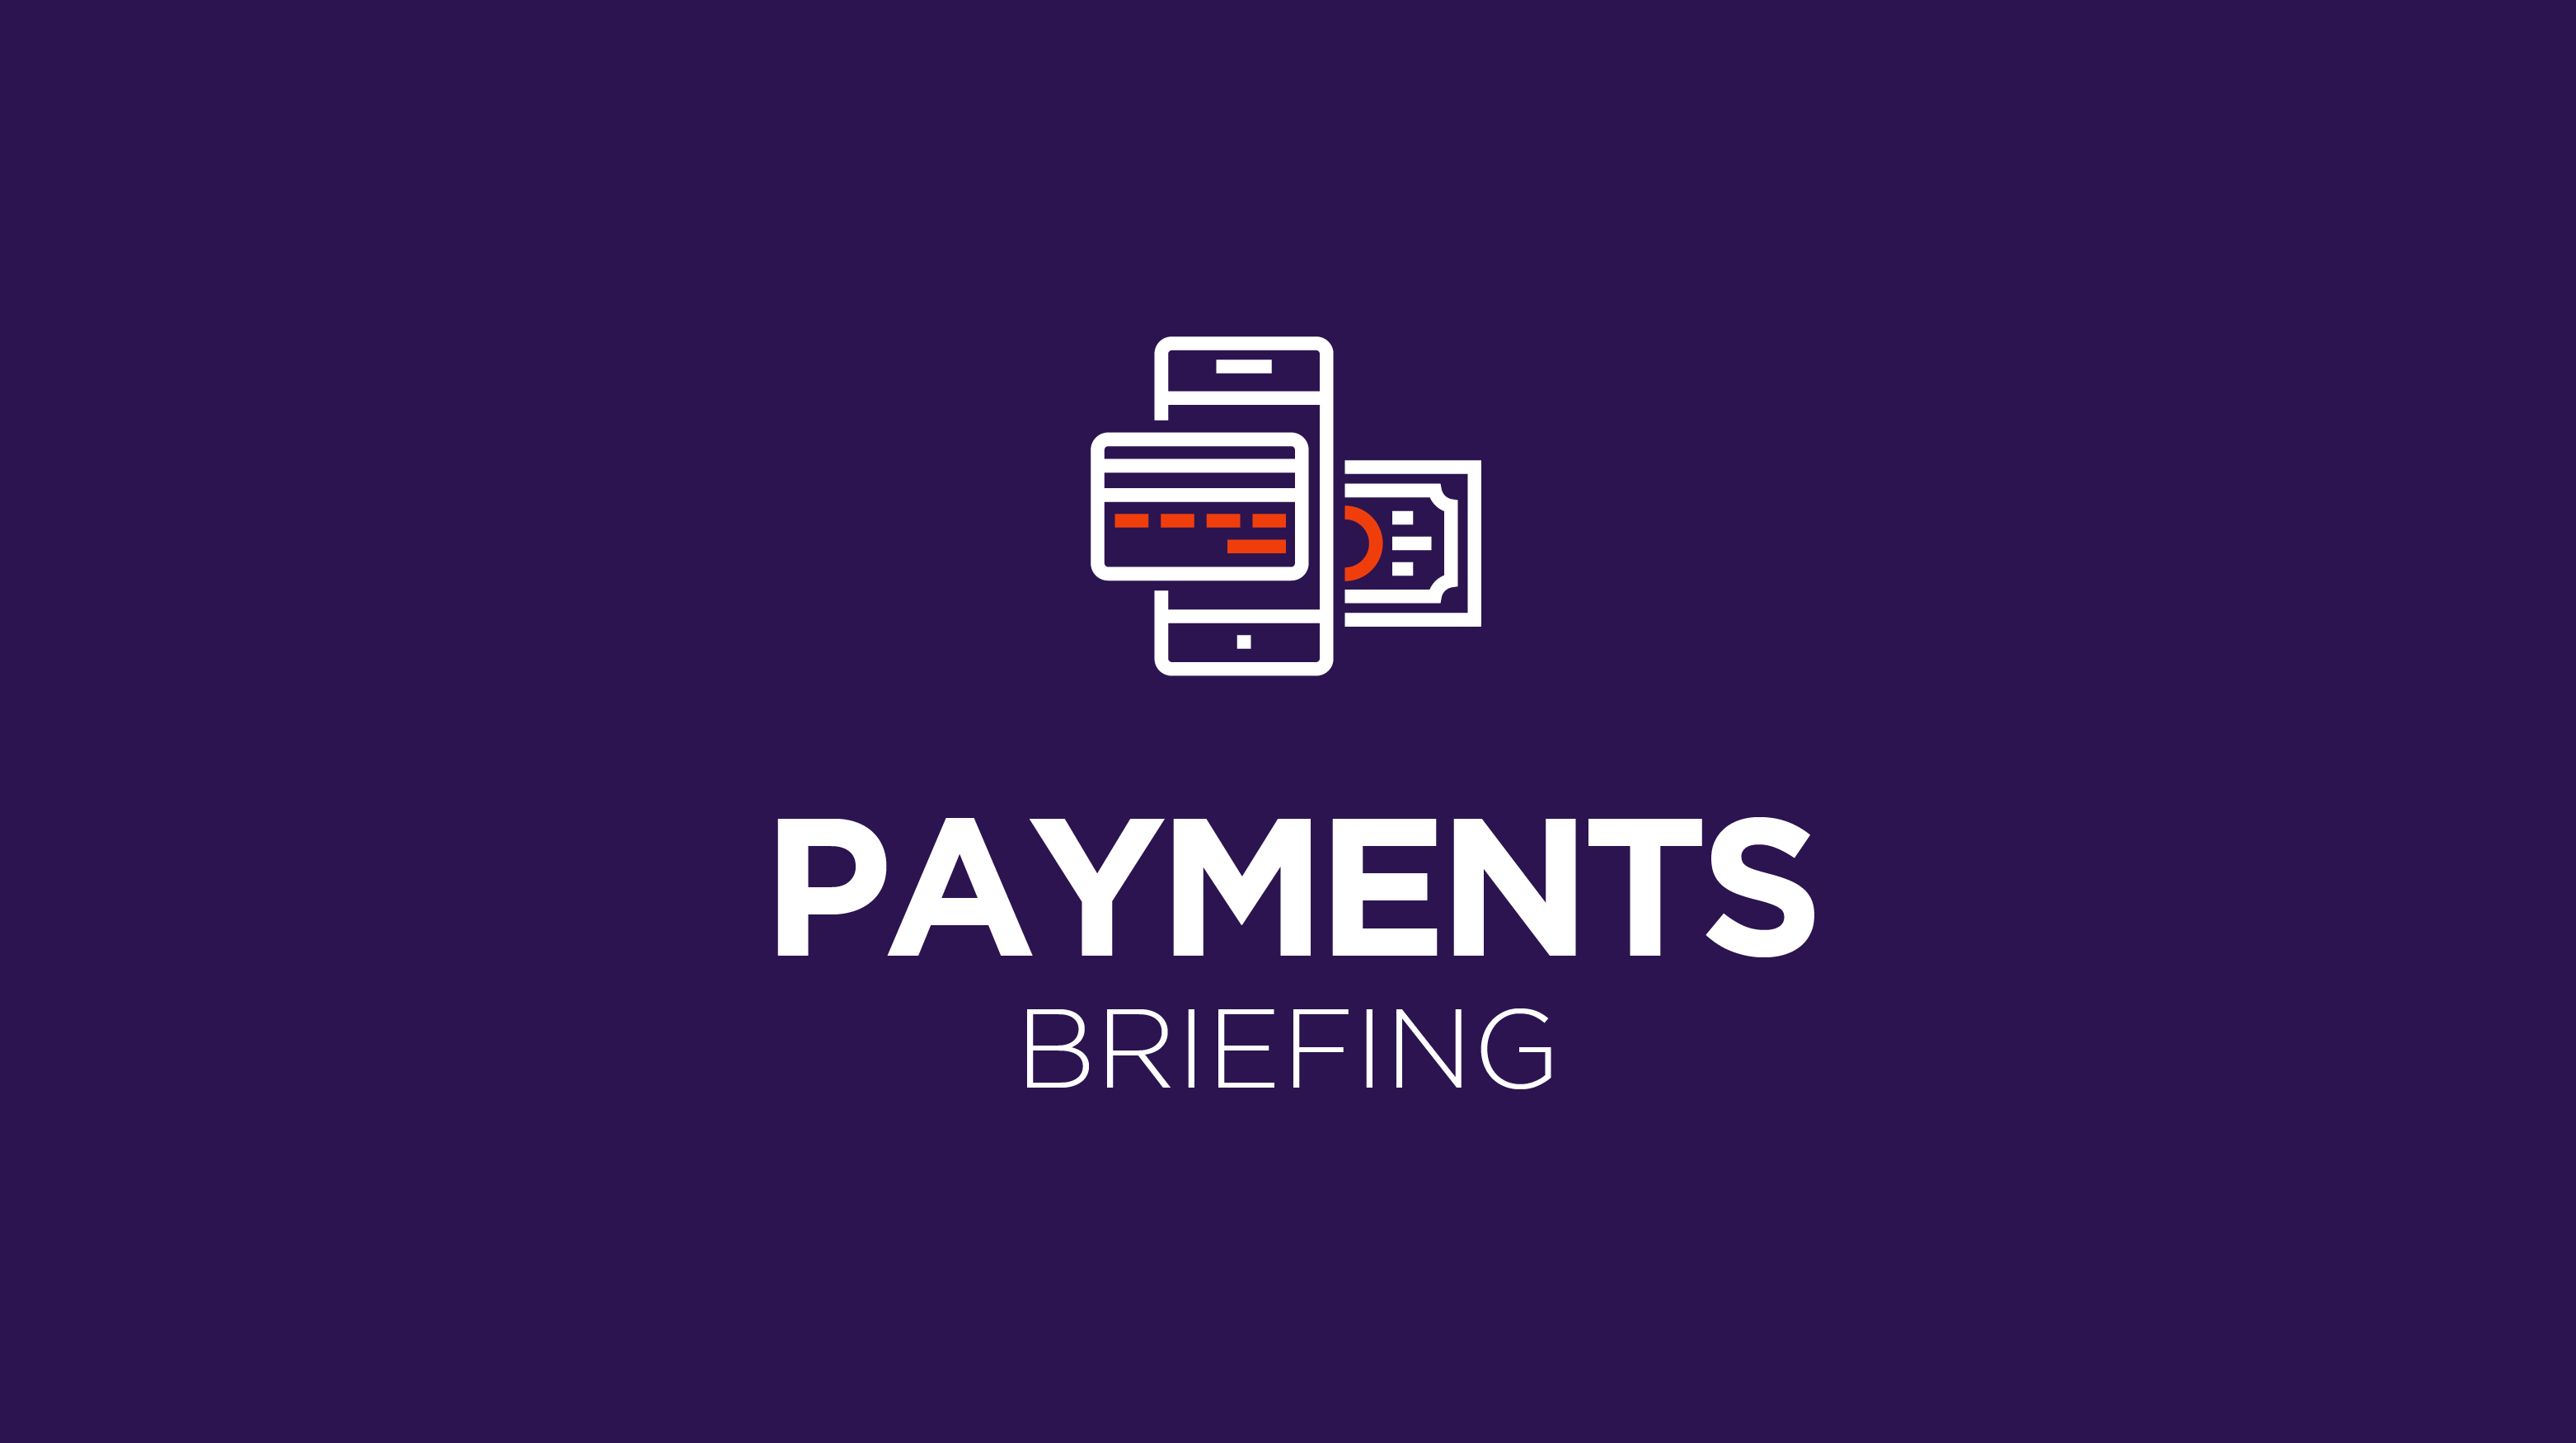 Payments Briefing: Looking back at our top stories of 2022